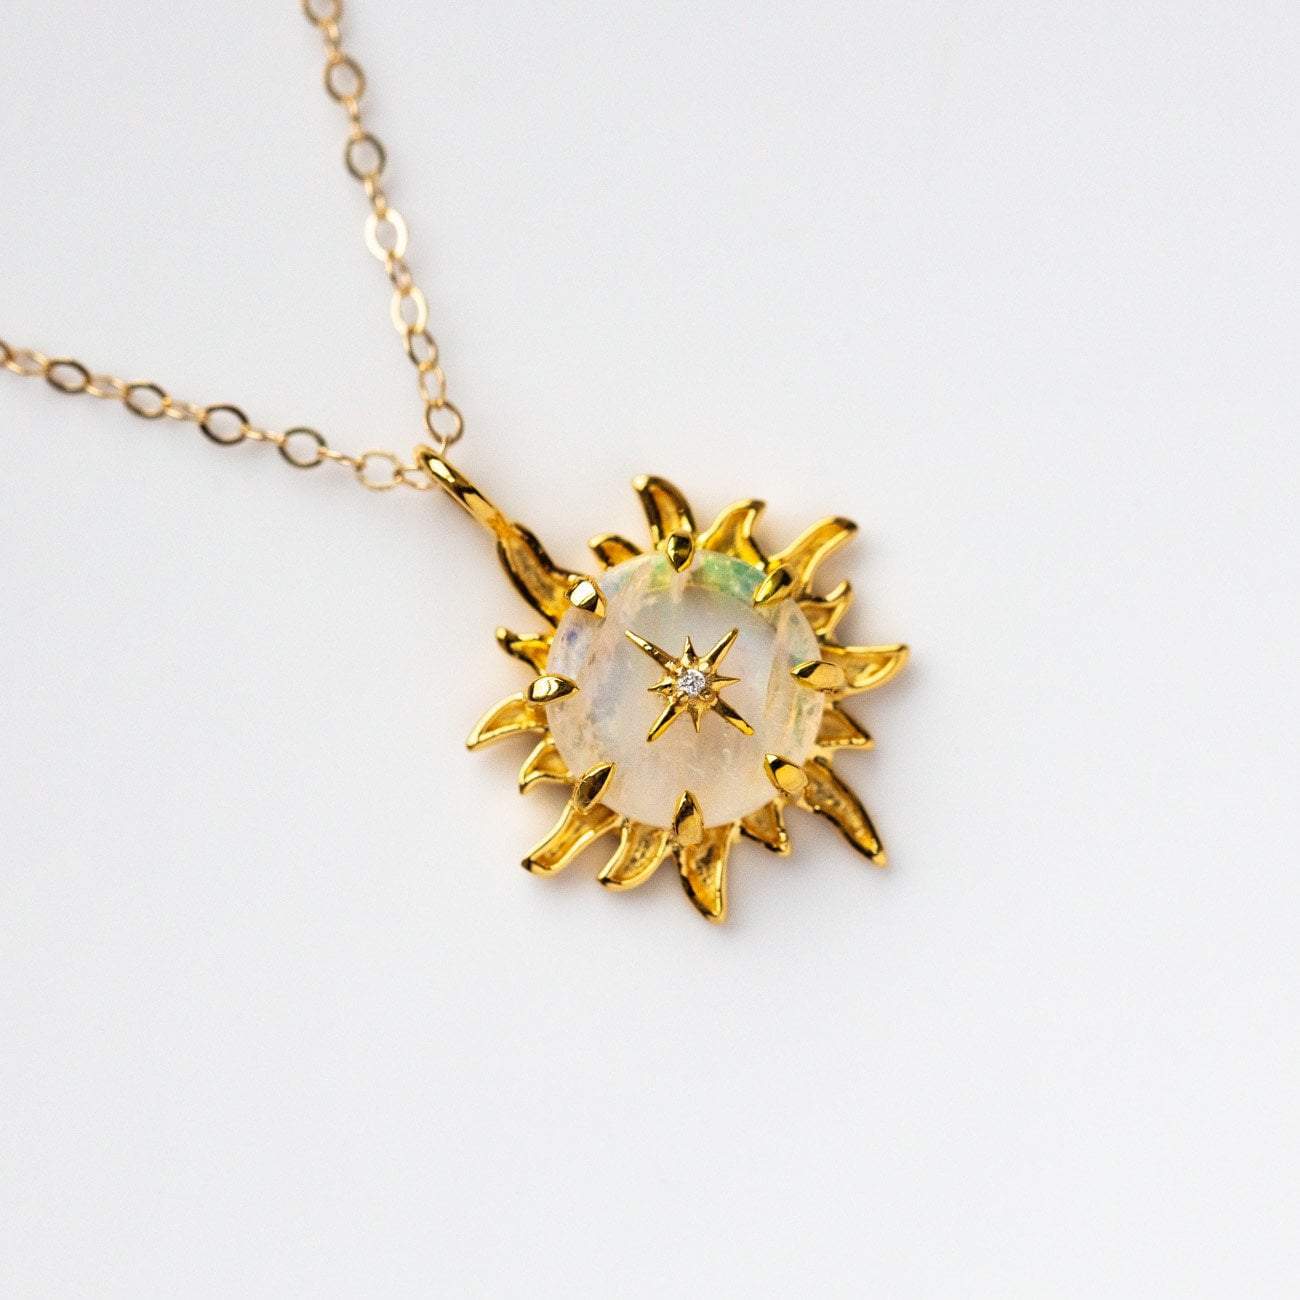 "You Are My Forever Sun, Moon & Star" Pendant necklaces La Kaiser 